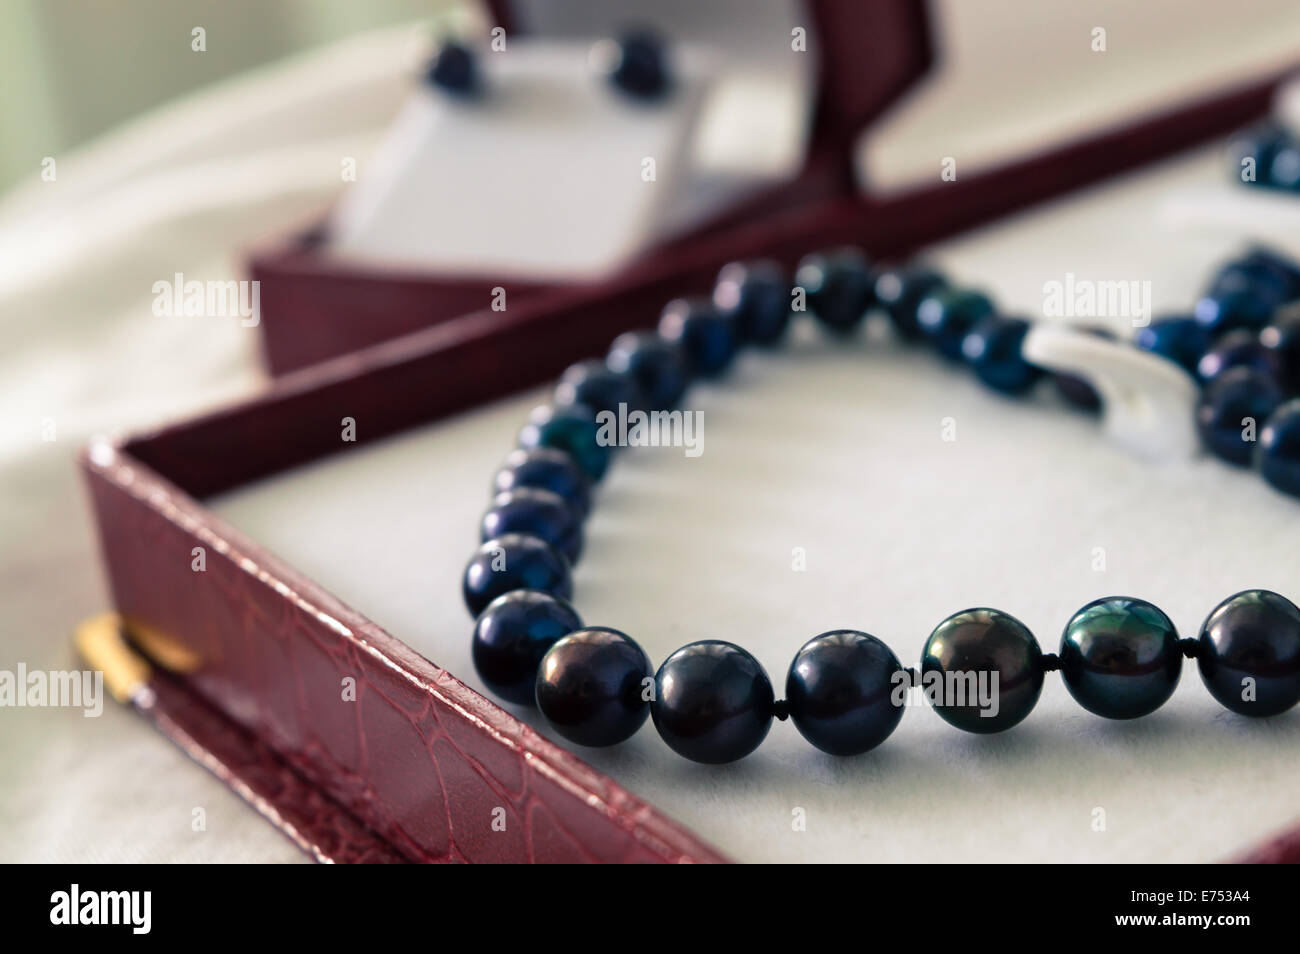 A black pearl necklace in a red jewelry box Stock Photo